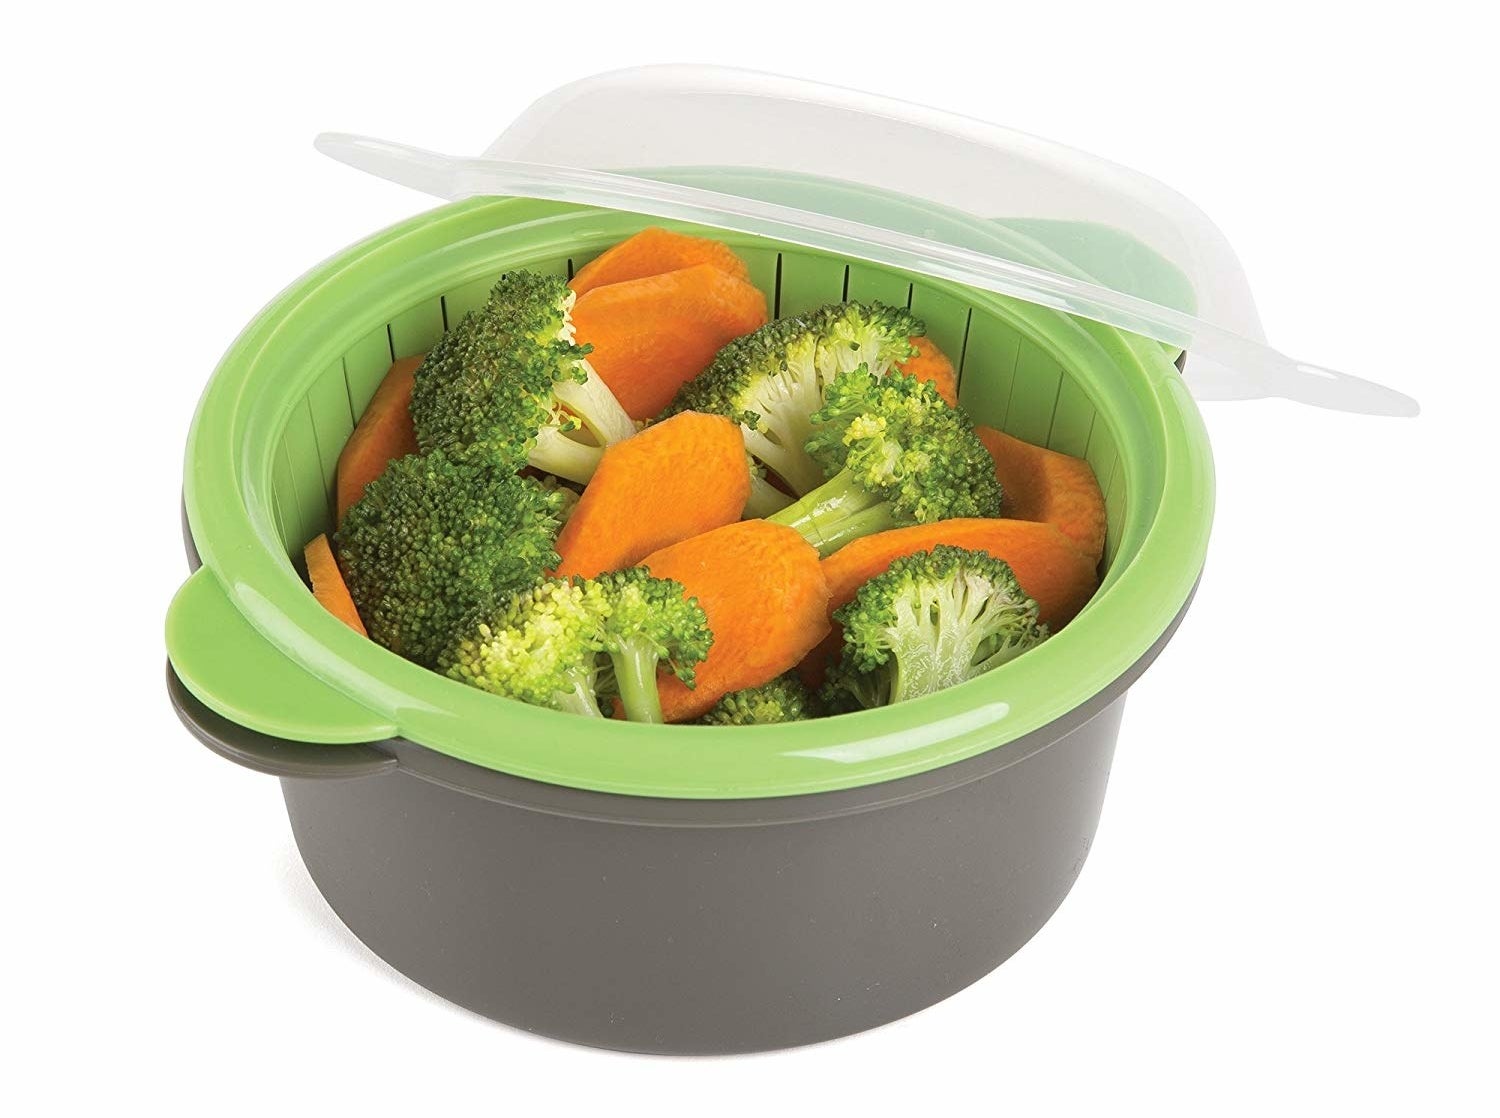 Carrots and broccoli placed in microwavable veggie steamer